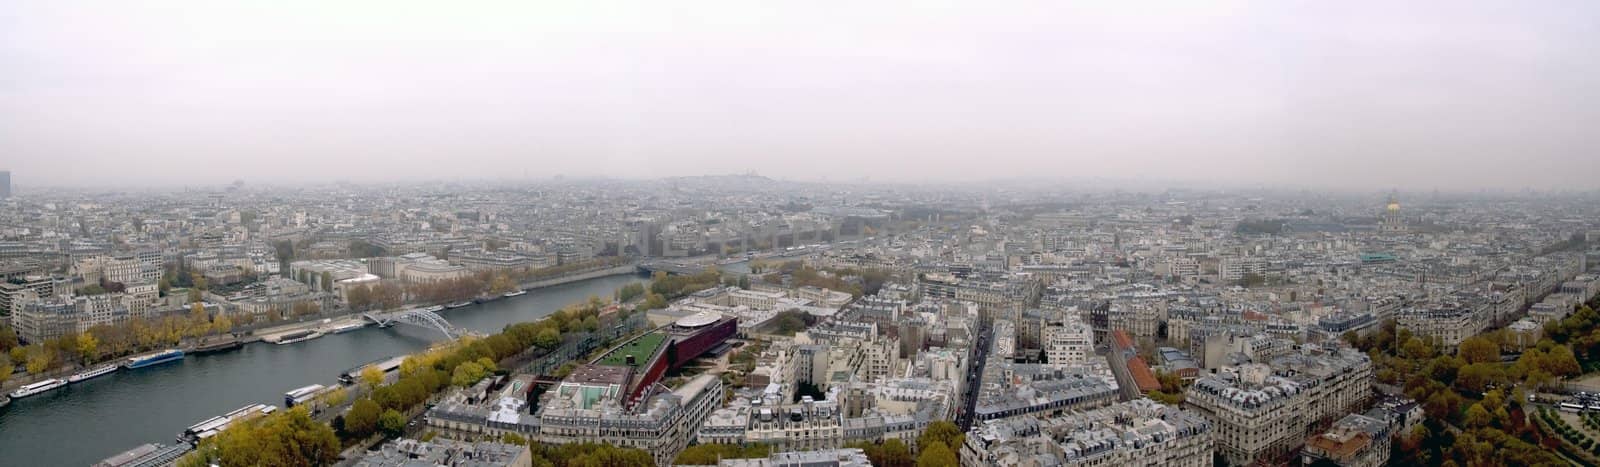 Paris as seen from the Tower of Eiffel by chrisroll